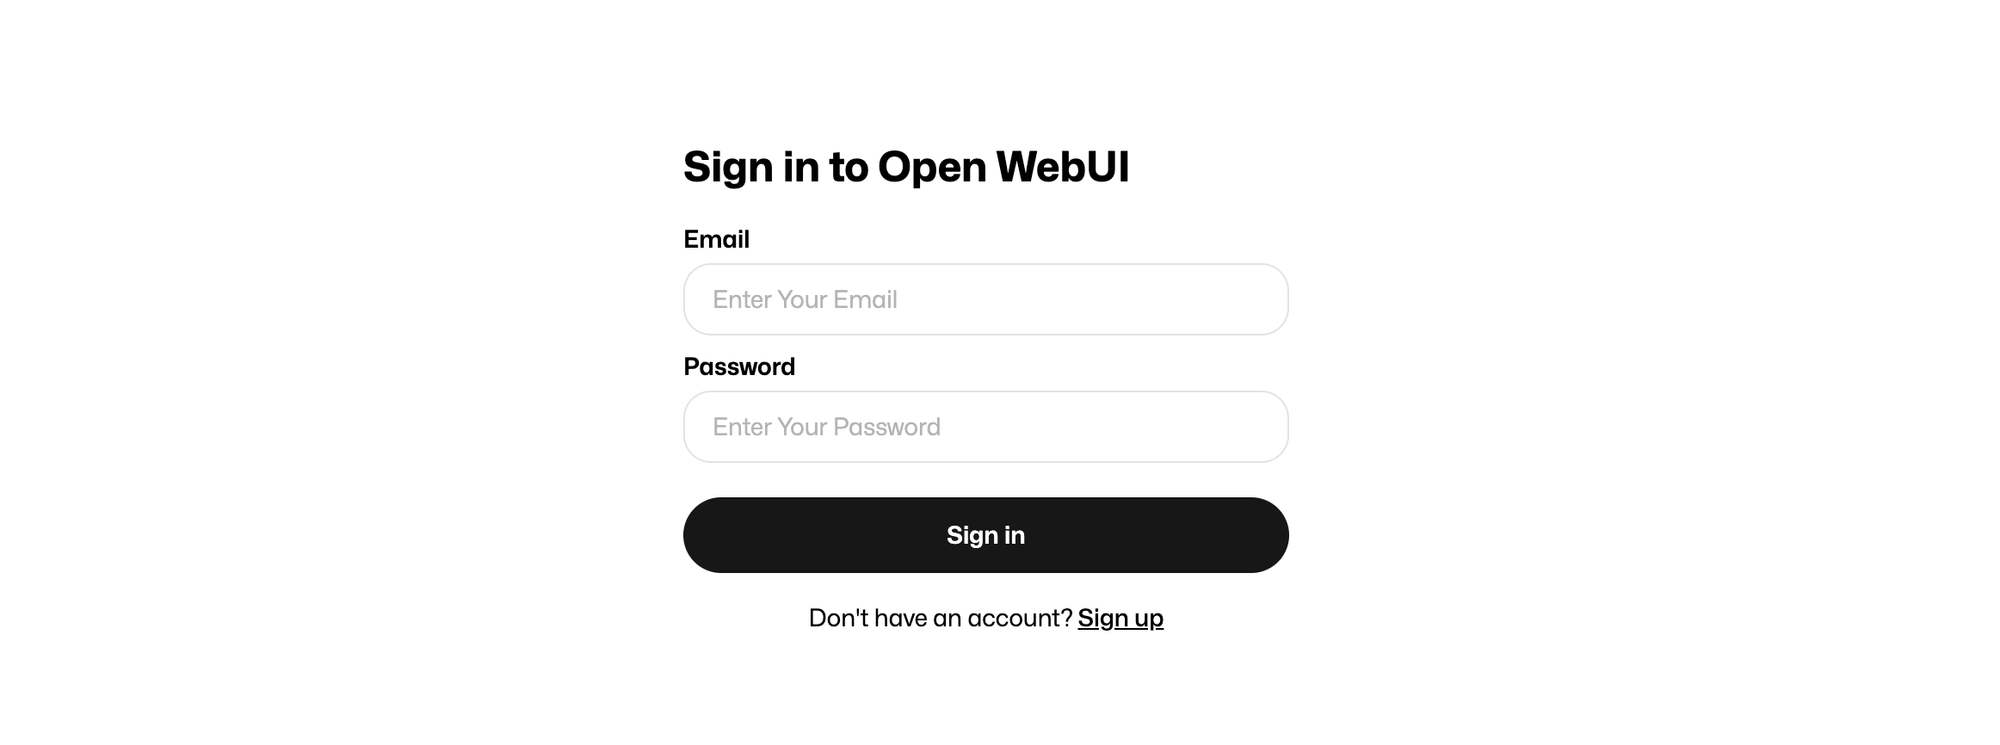 Open WebUI sign in / sign up screen